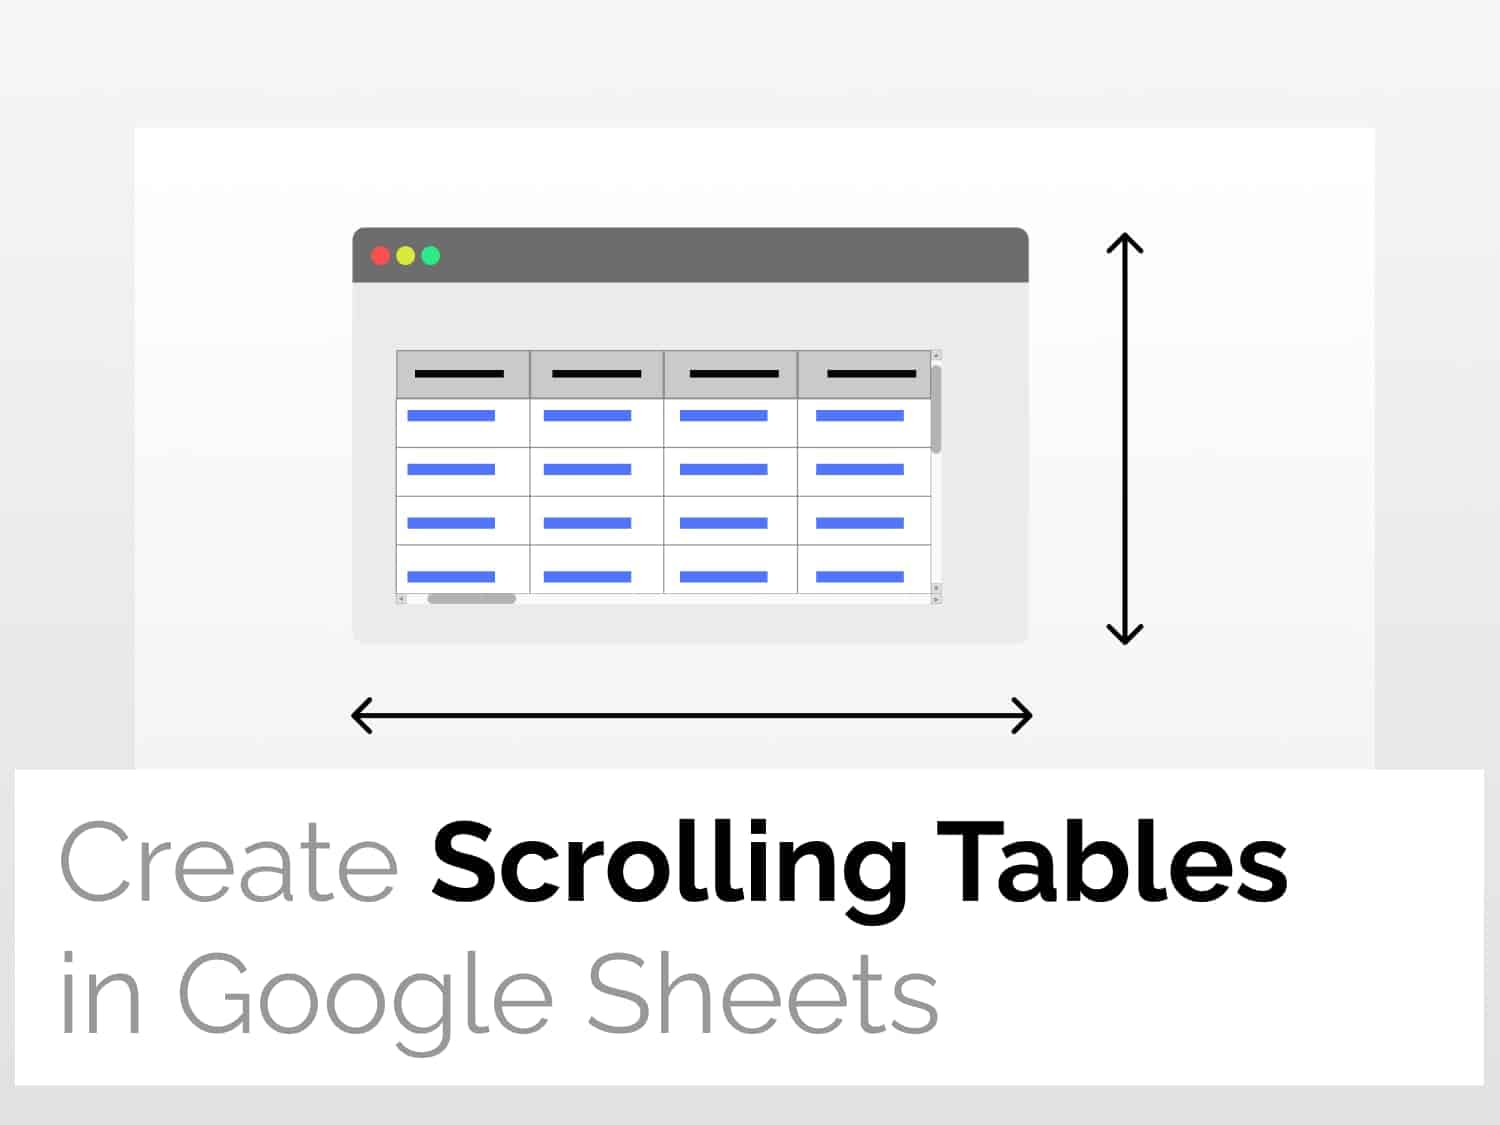 How to create scrolling tables in Google Sheets